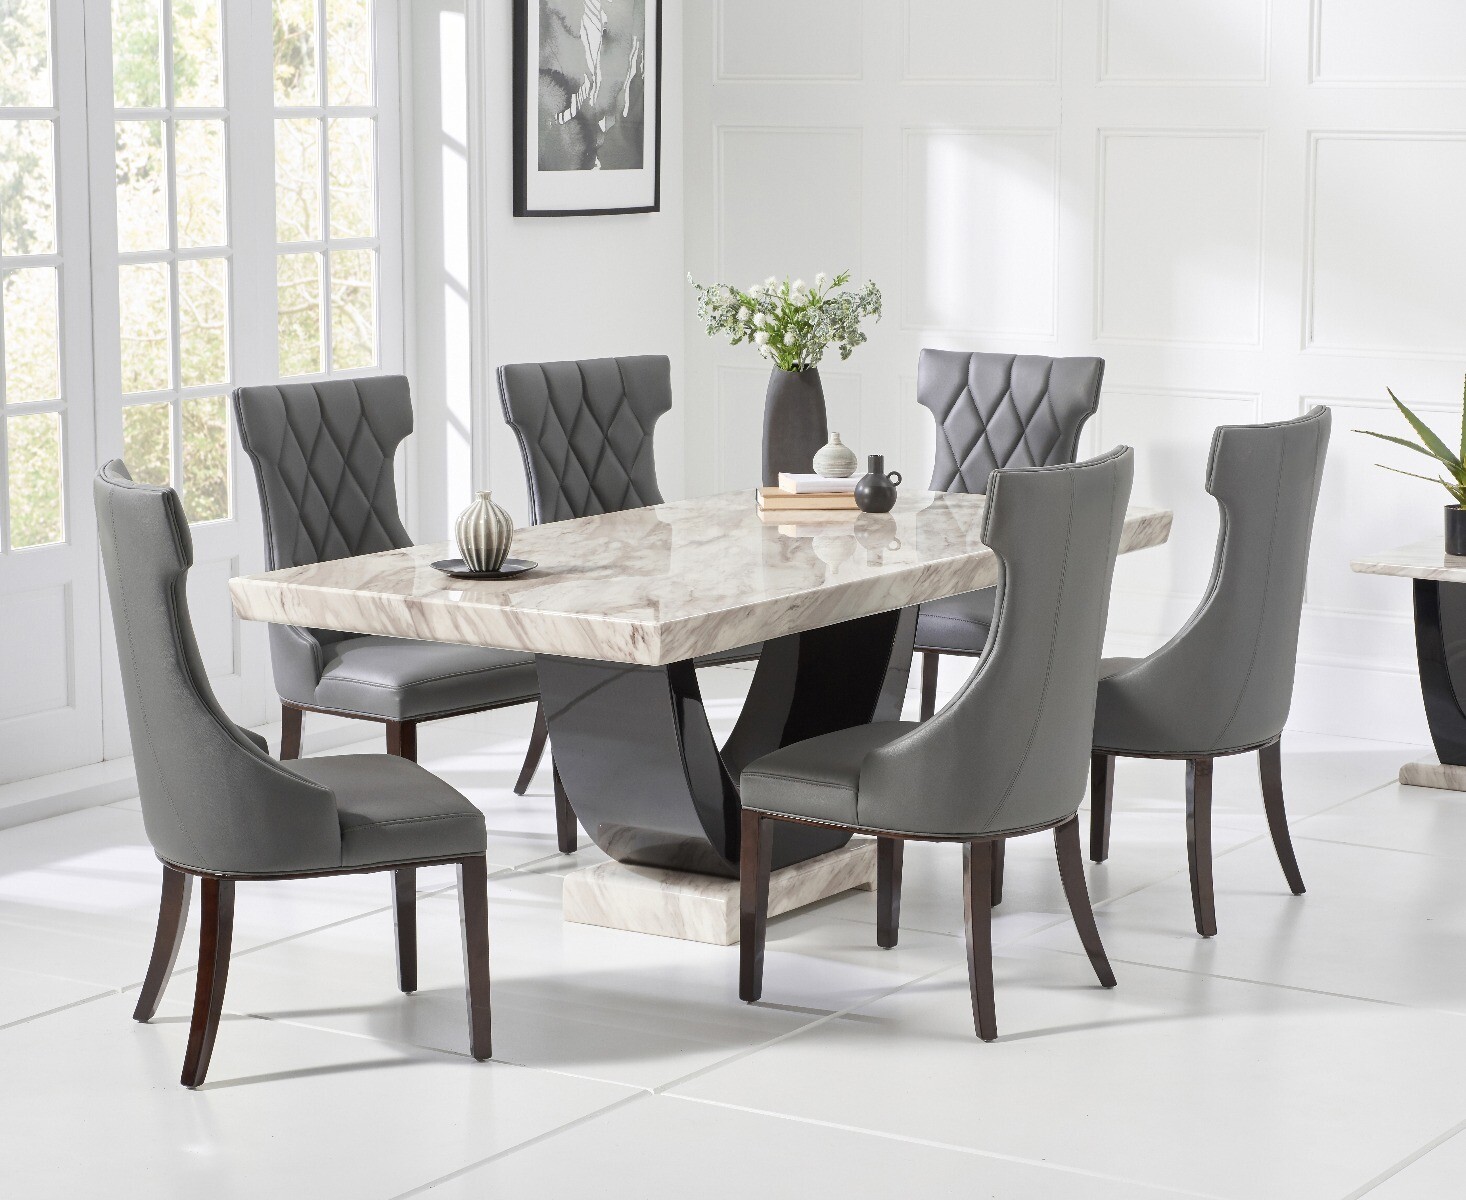 Raphael 170cm Cream And Black Pedestal Marble Dining Table With 6 Cream Sophia Chairs